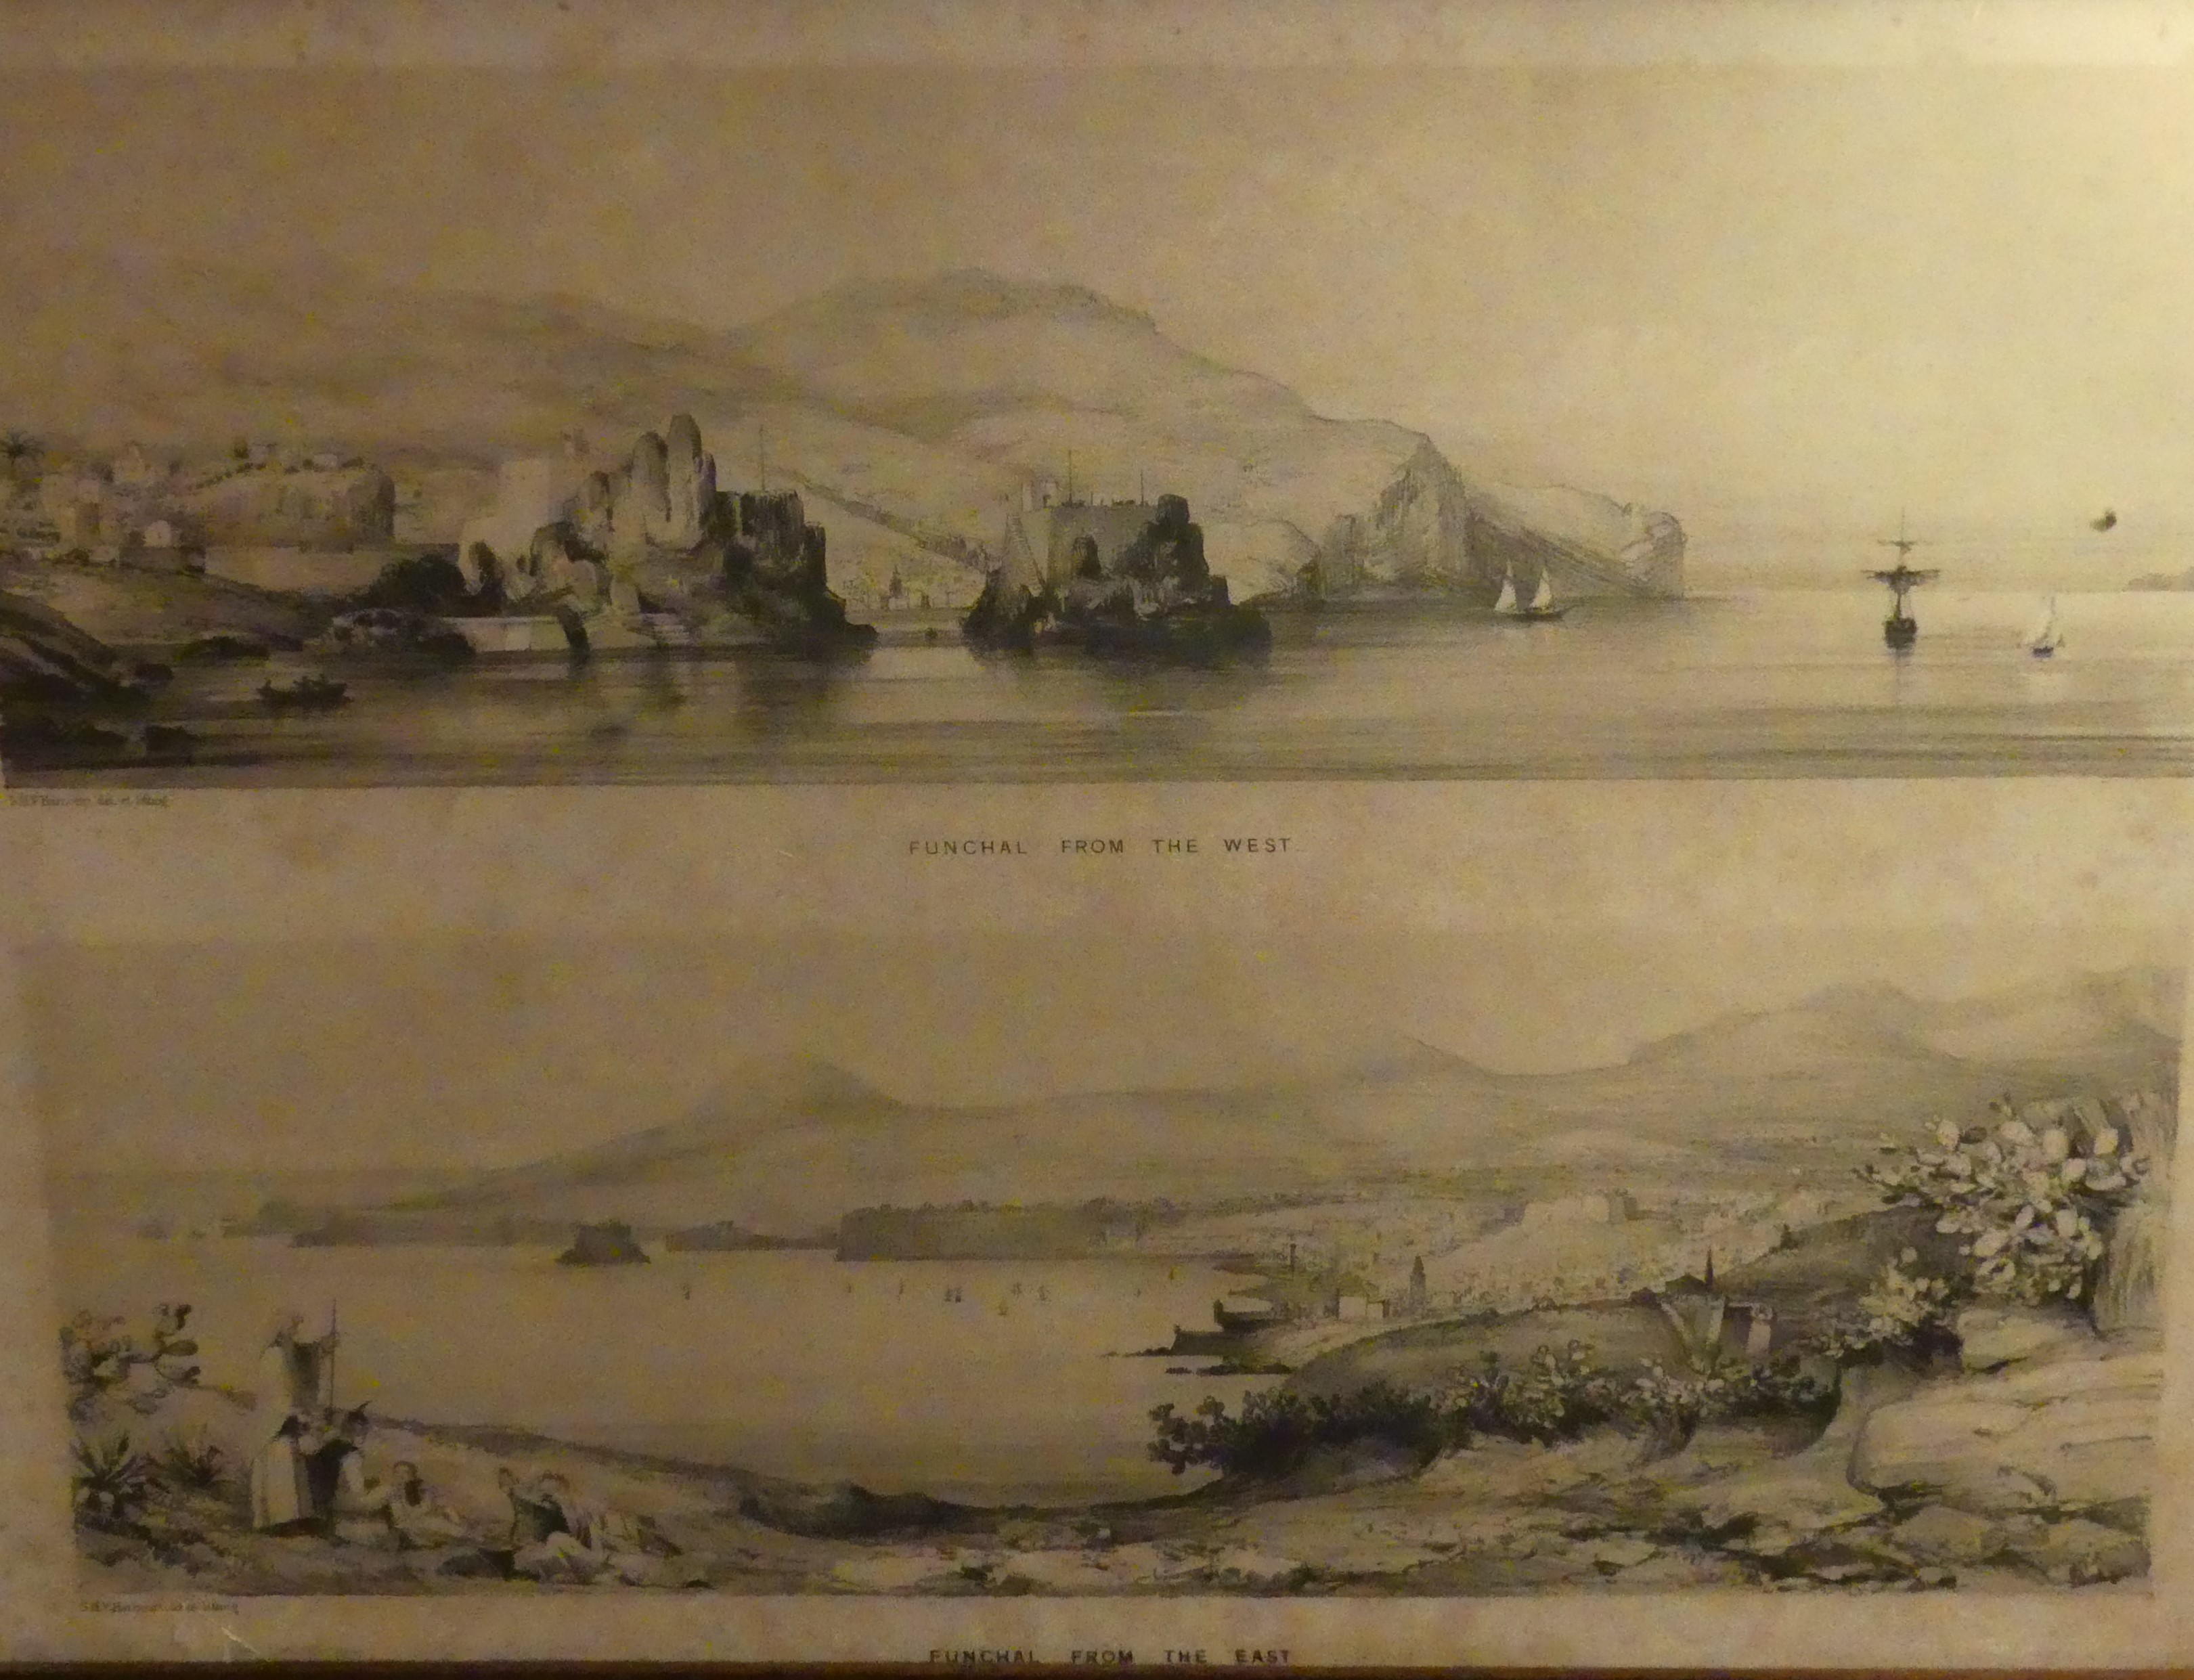 Old sketches of Funchal found in the Quinta da Penha